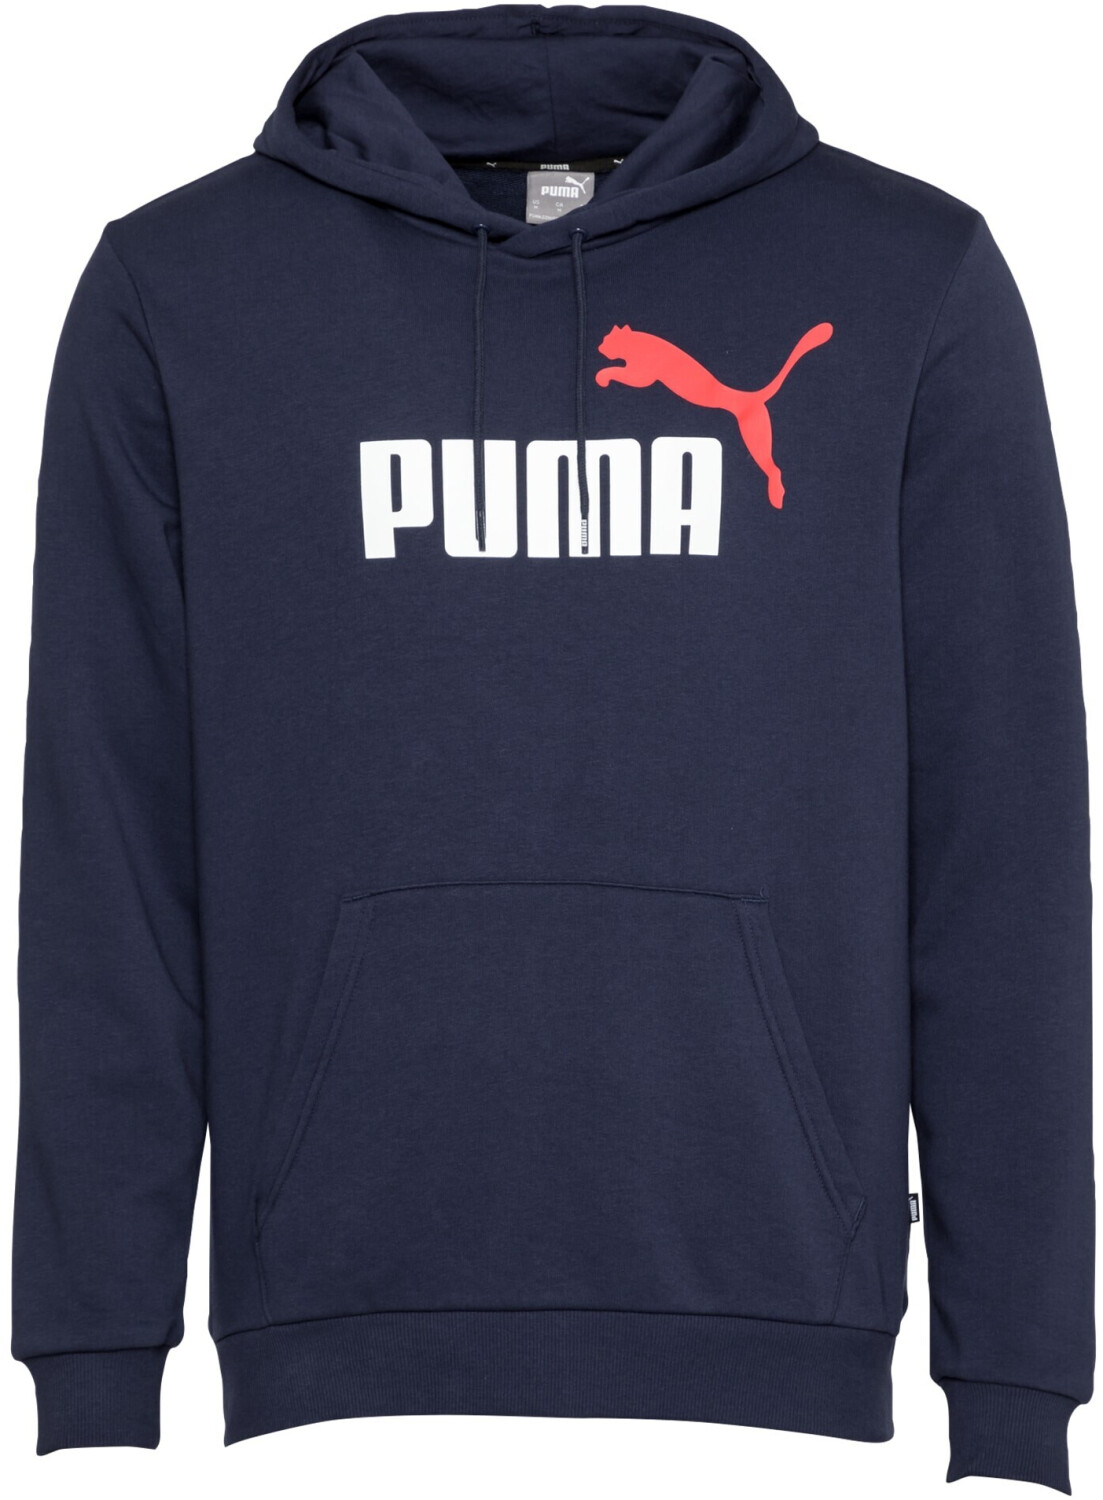 Buy Puma Big Logo Hoodie (586765) from £25.90 (Today) – Best Deals on ...